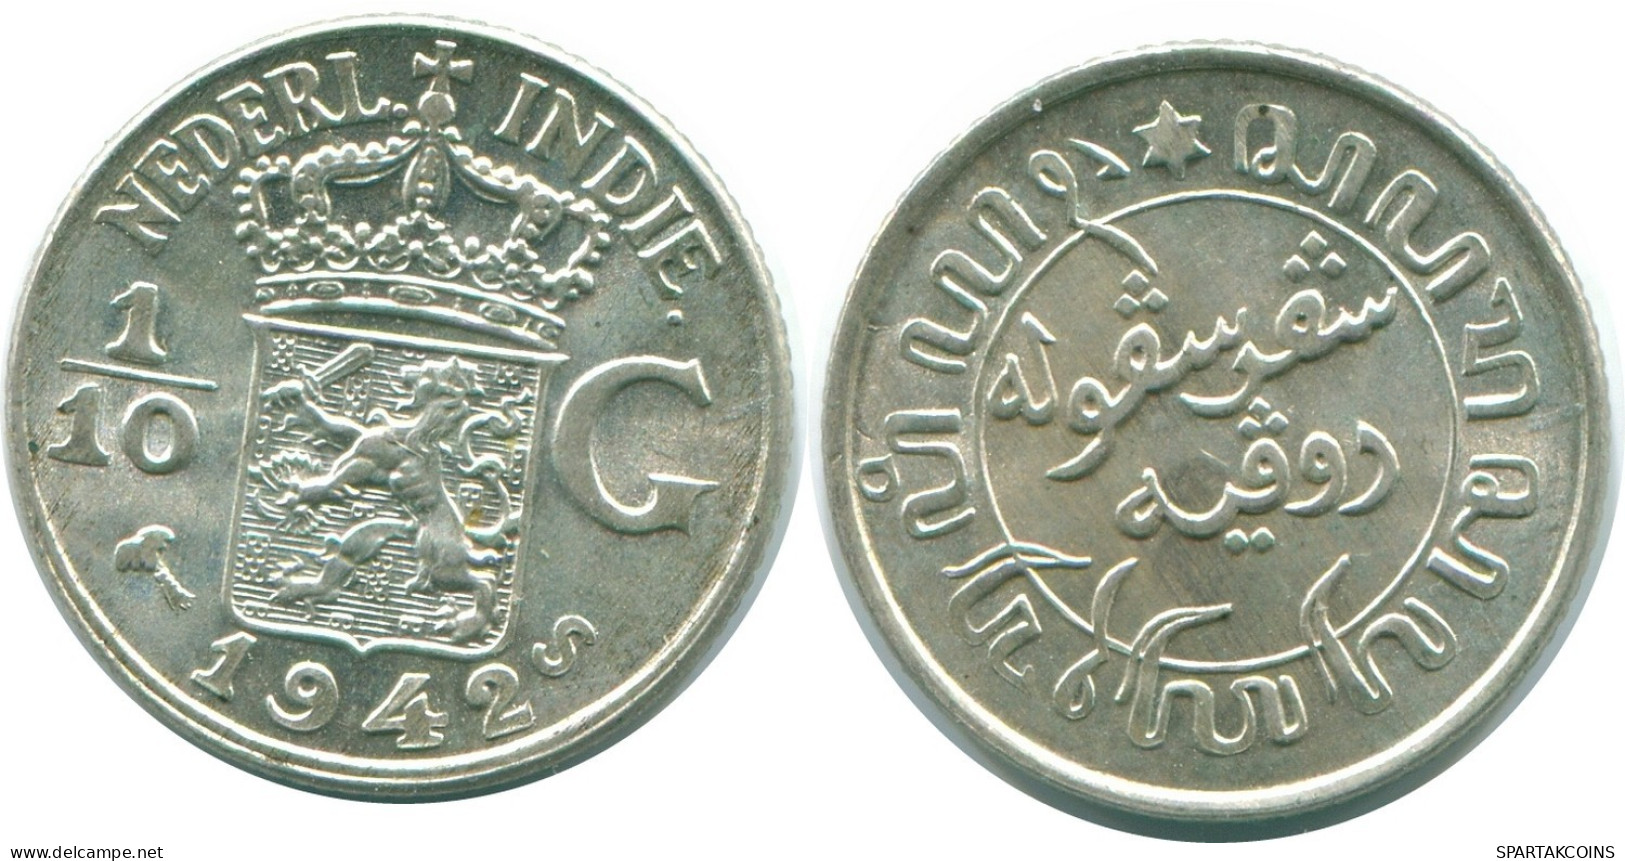 1/10 GULDEN 1942 NETHERLANDS EAST INDIES SILVER Colonial Coin #NL13855.3.U.A - Dutch East Indies